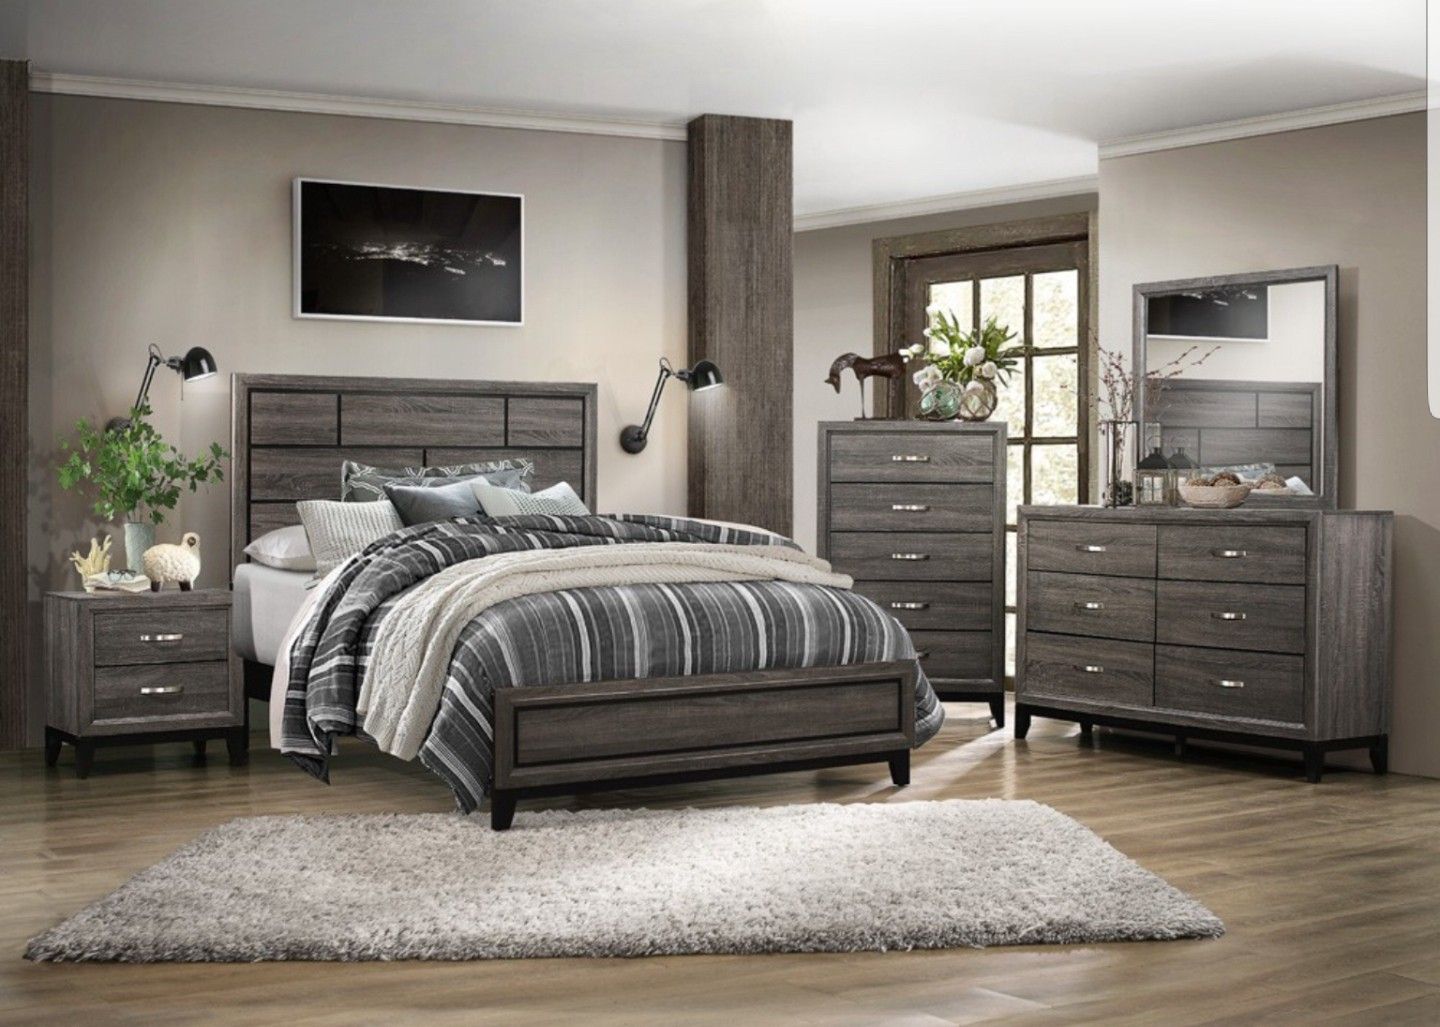 4-Pc Queen size bedroom set. Special offer